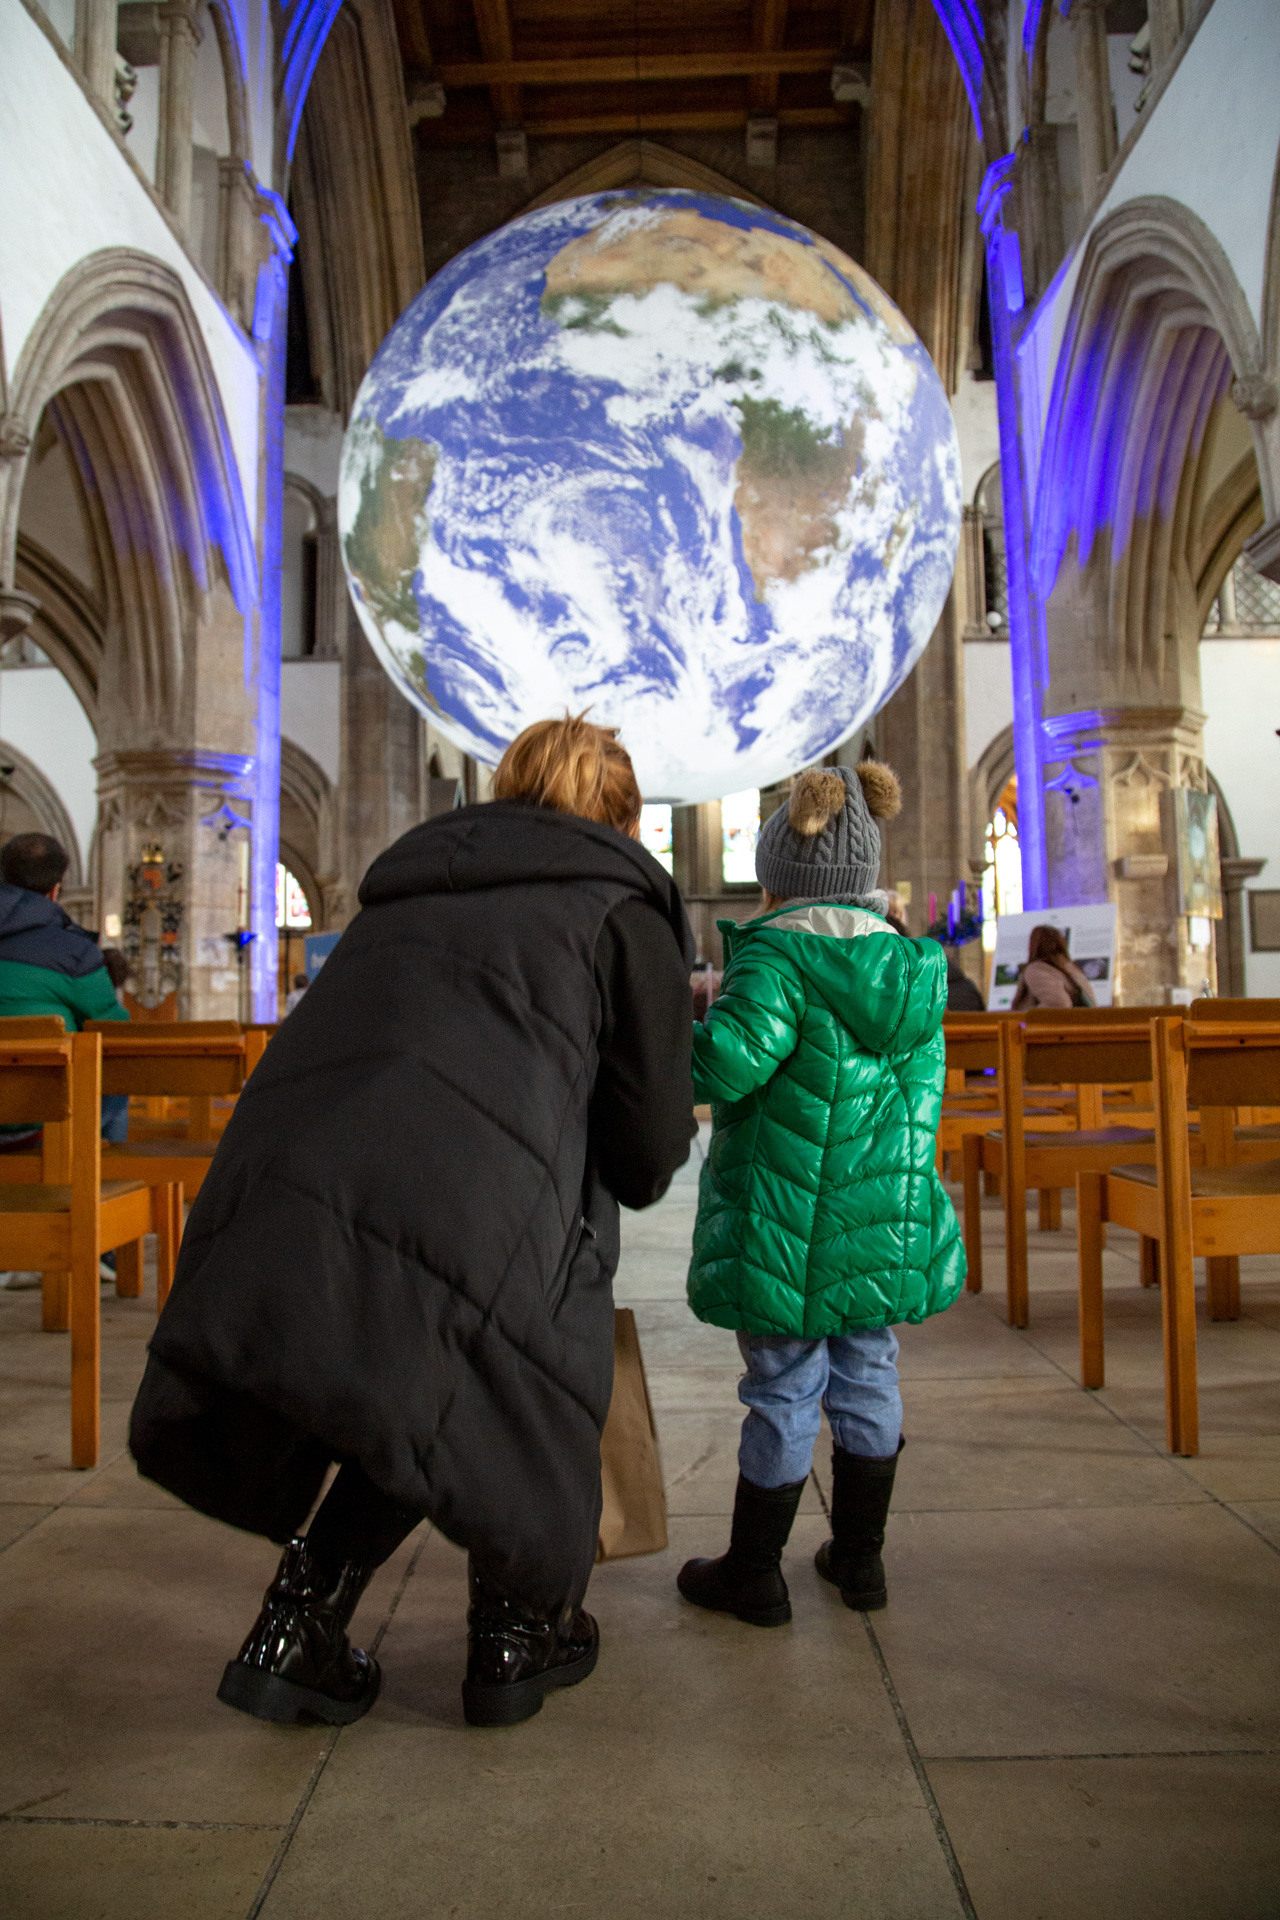 A woman and child looking at a large exhibit of the Earth in a church